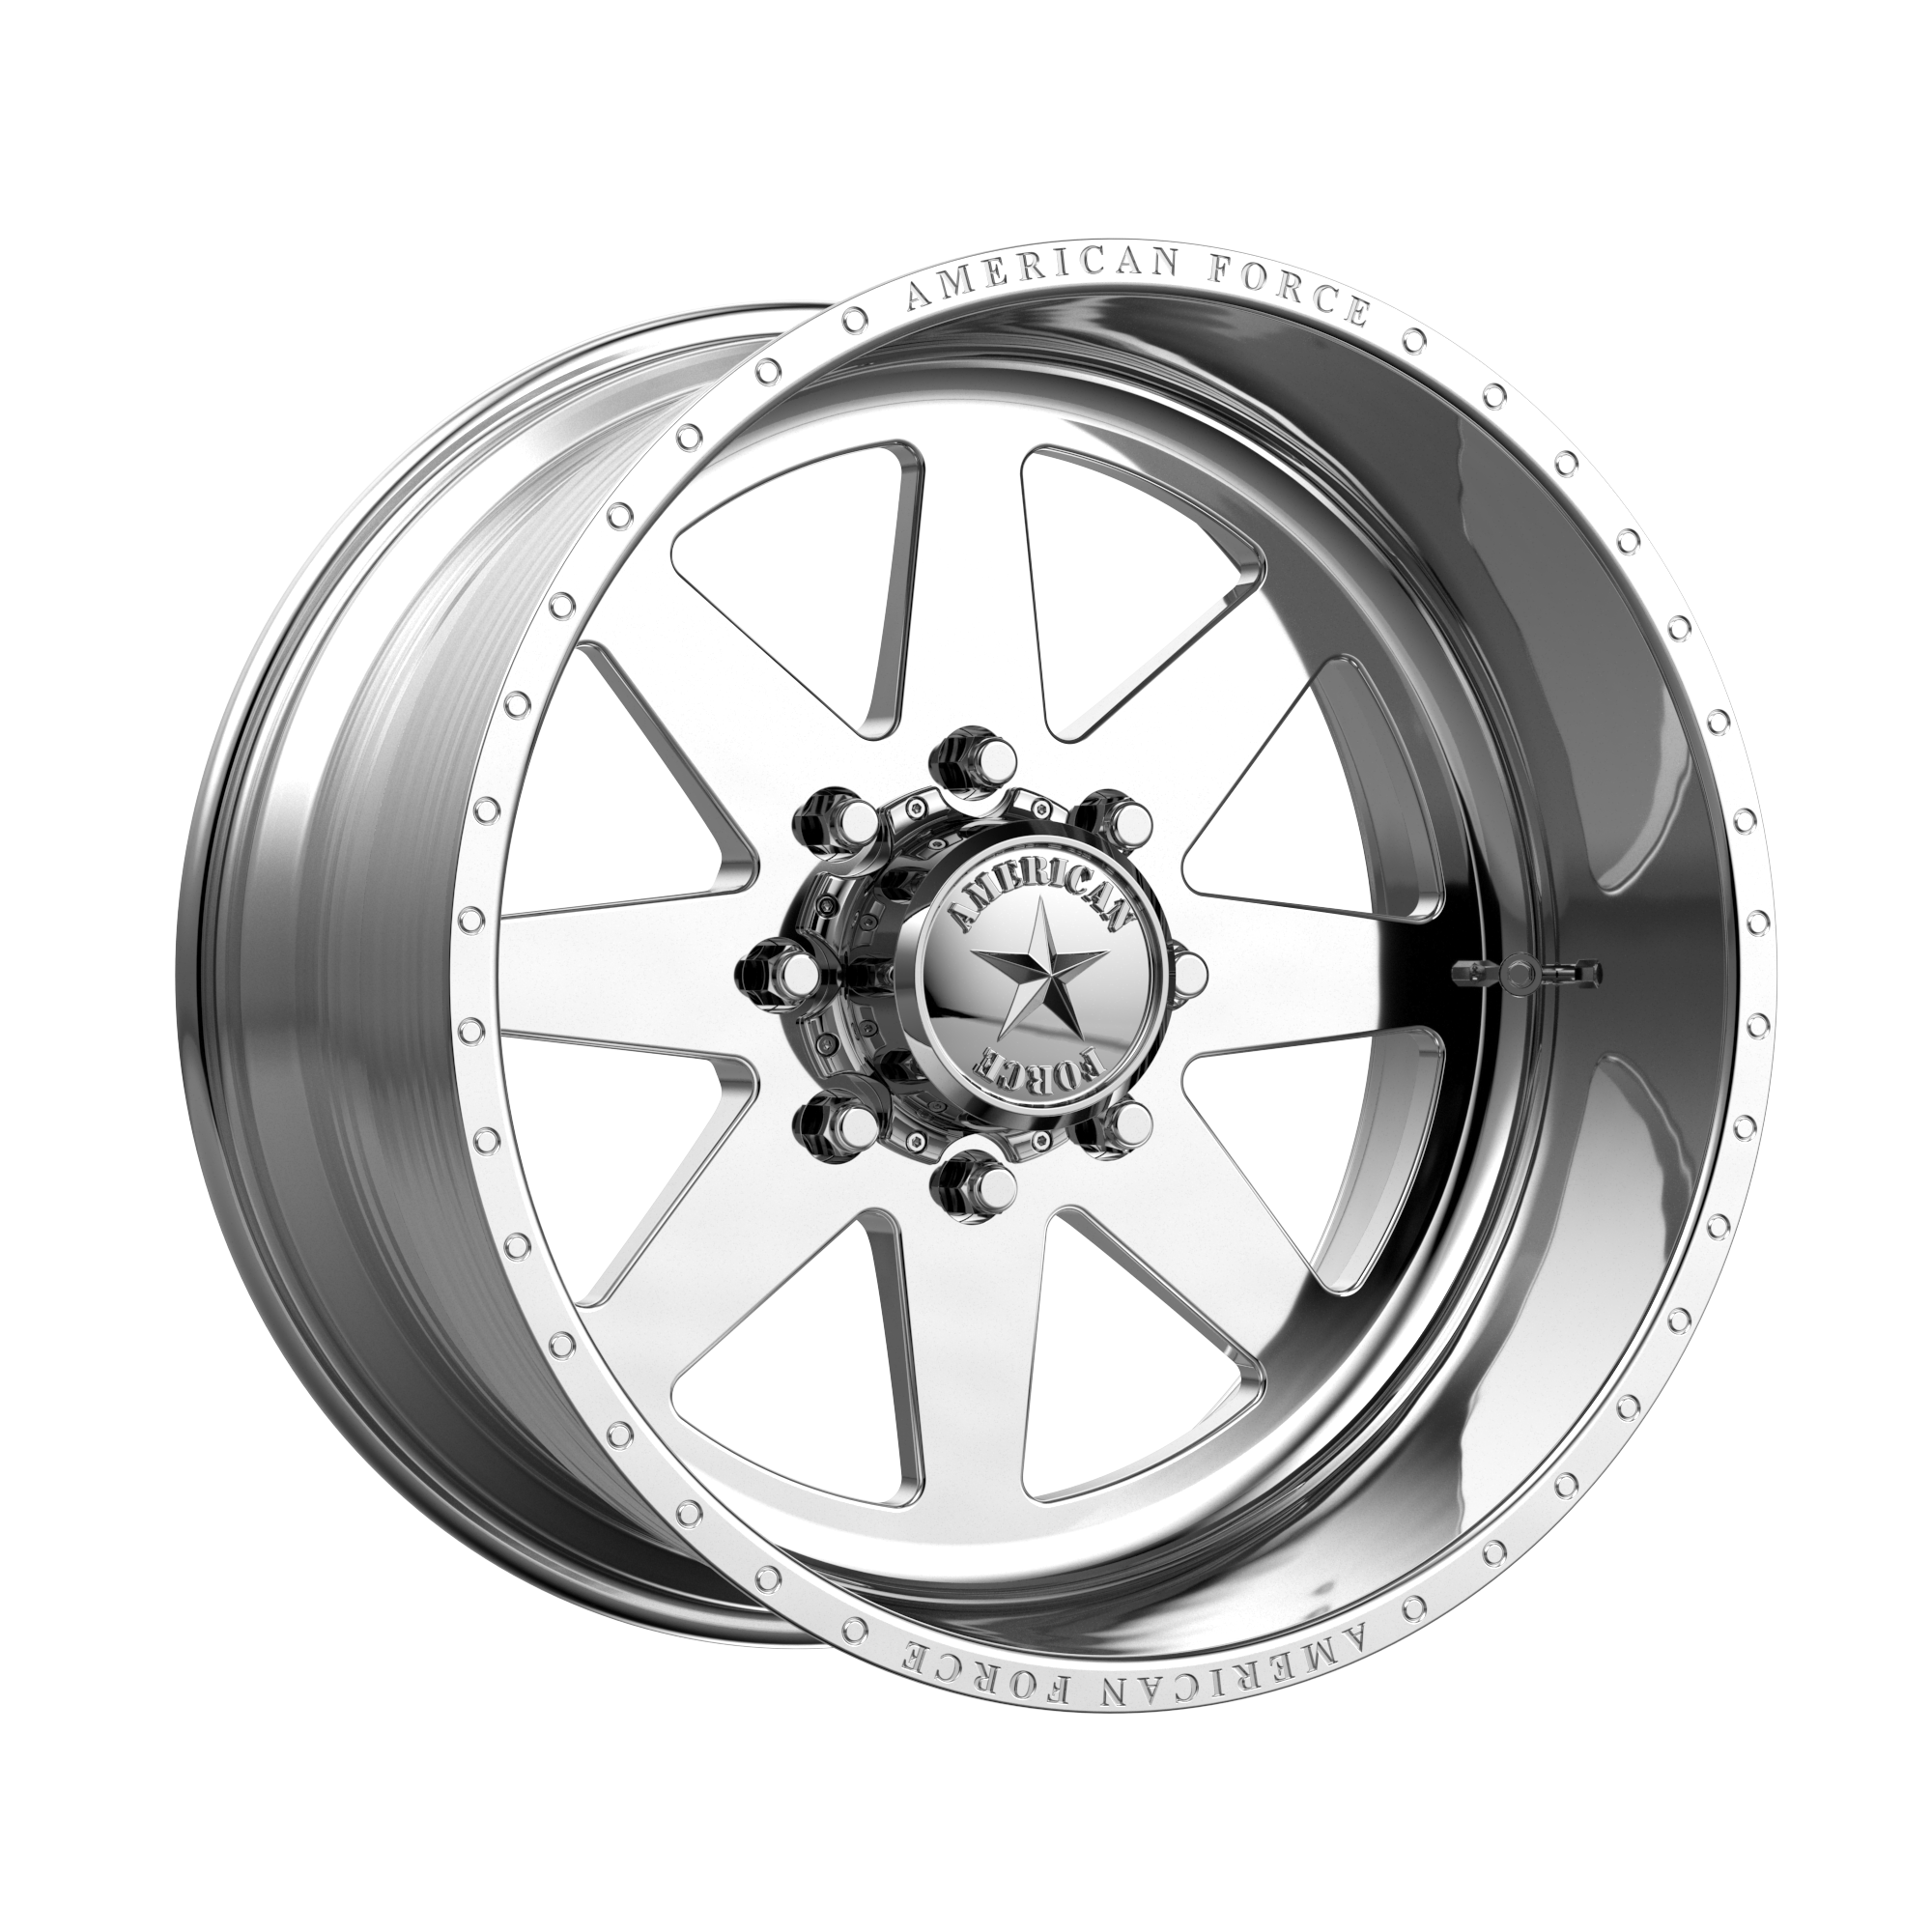 INDEPENDENCE SS 26x16 6x135.00 POLISHED (-101 mm) - Tires and Engine Performance